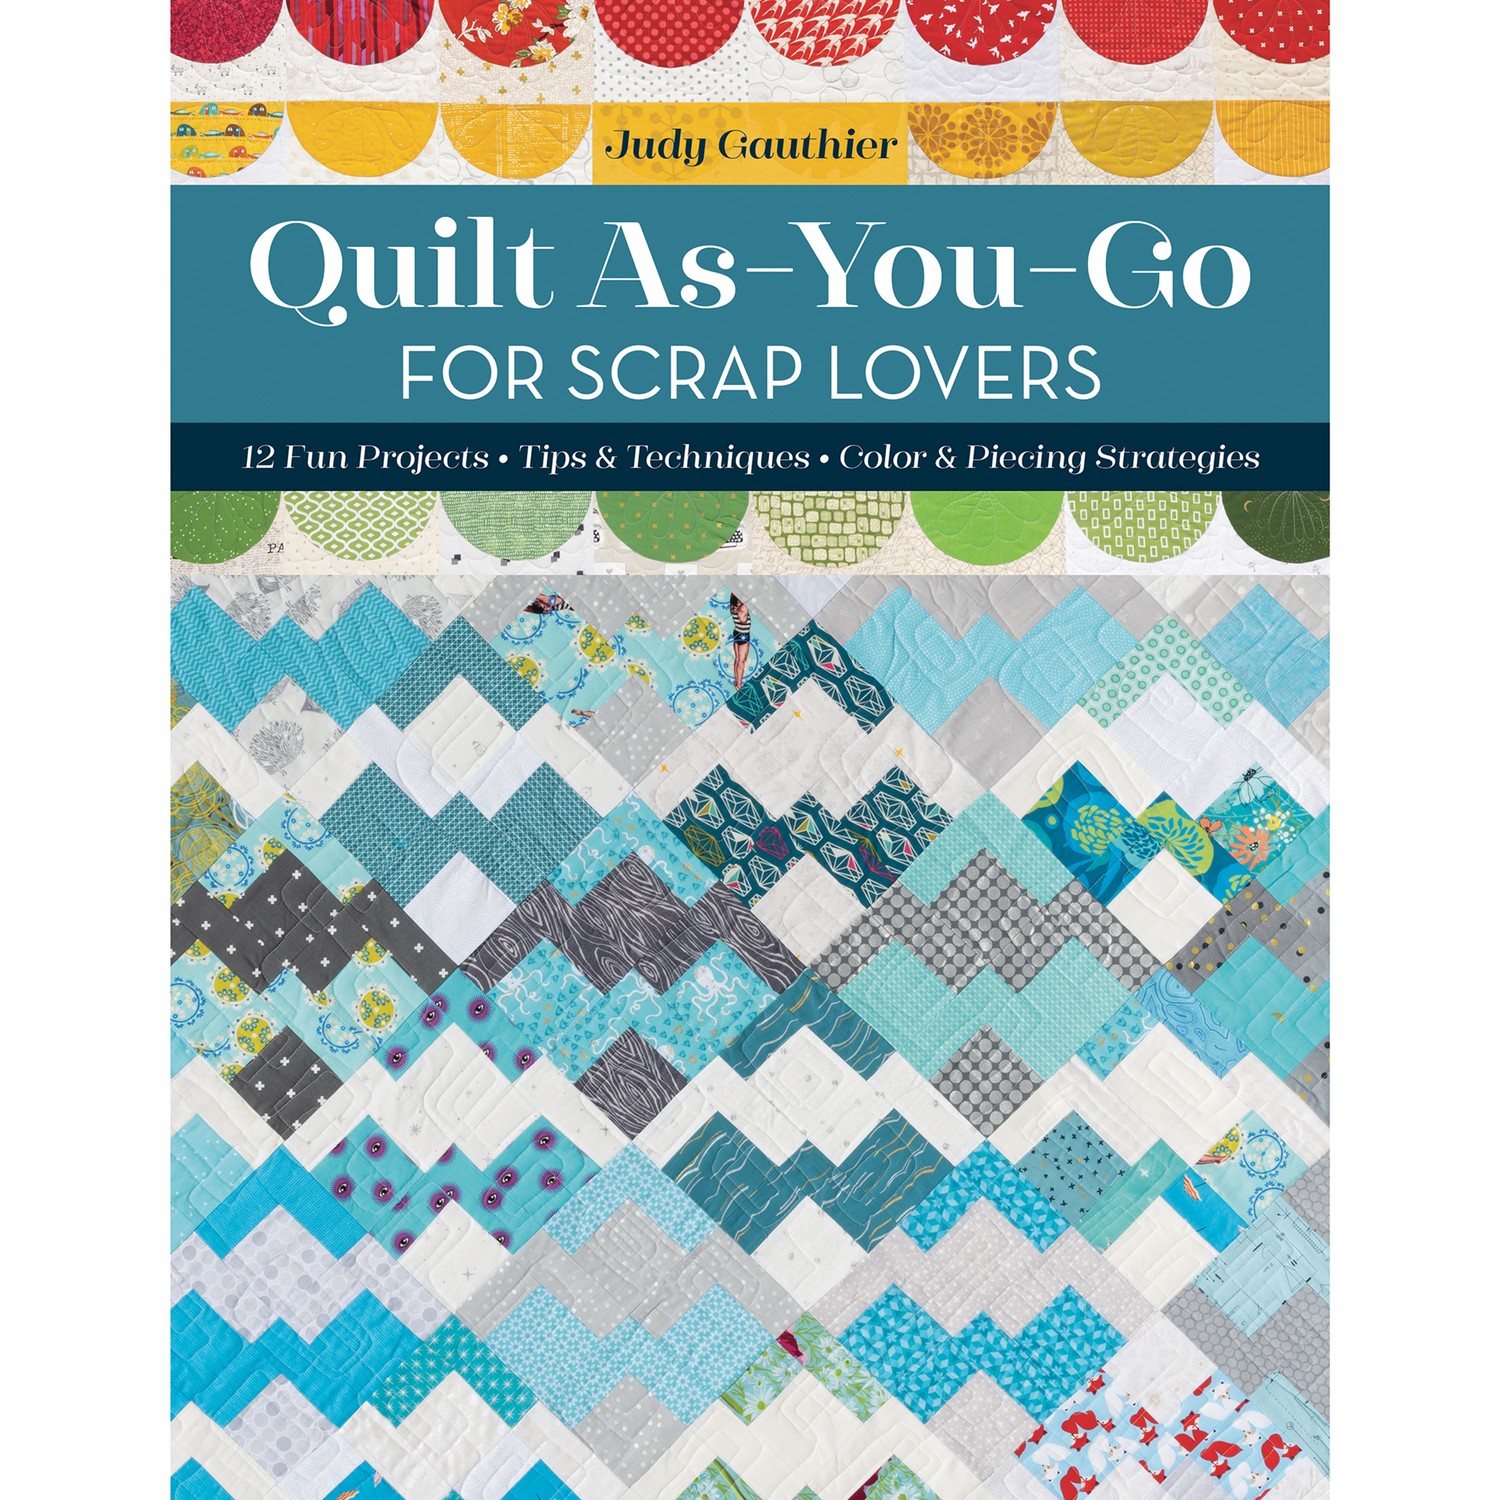 Quilt As-You-Go for Scrap Lovers: 12 Fun Projects; Tips and Techniques; Color and Piecing Strategies [Book]